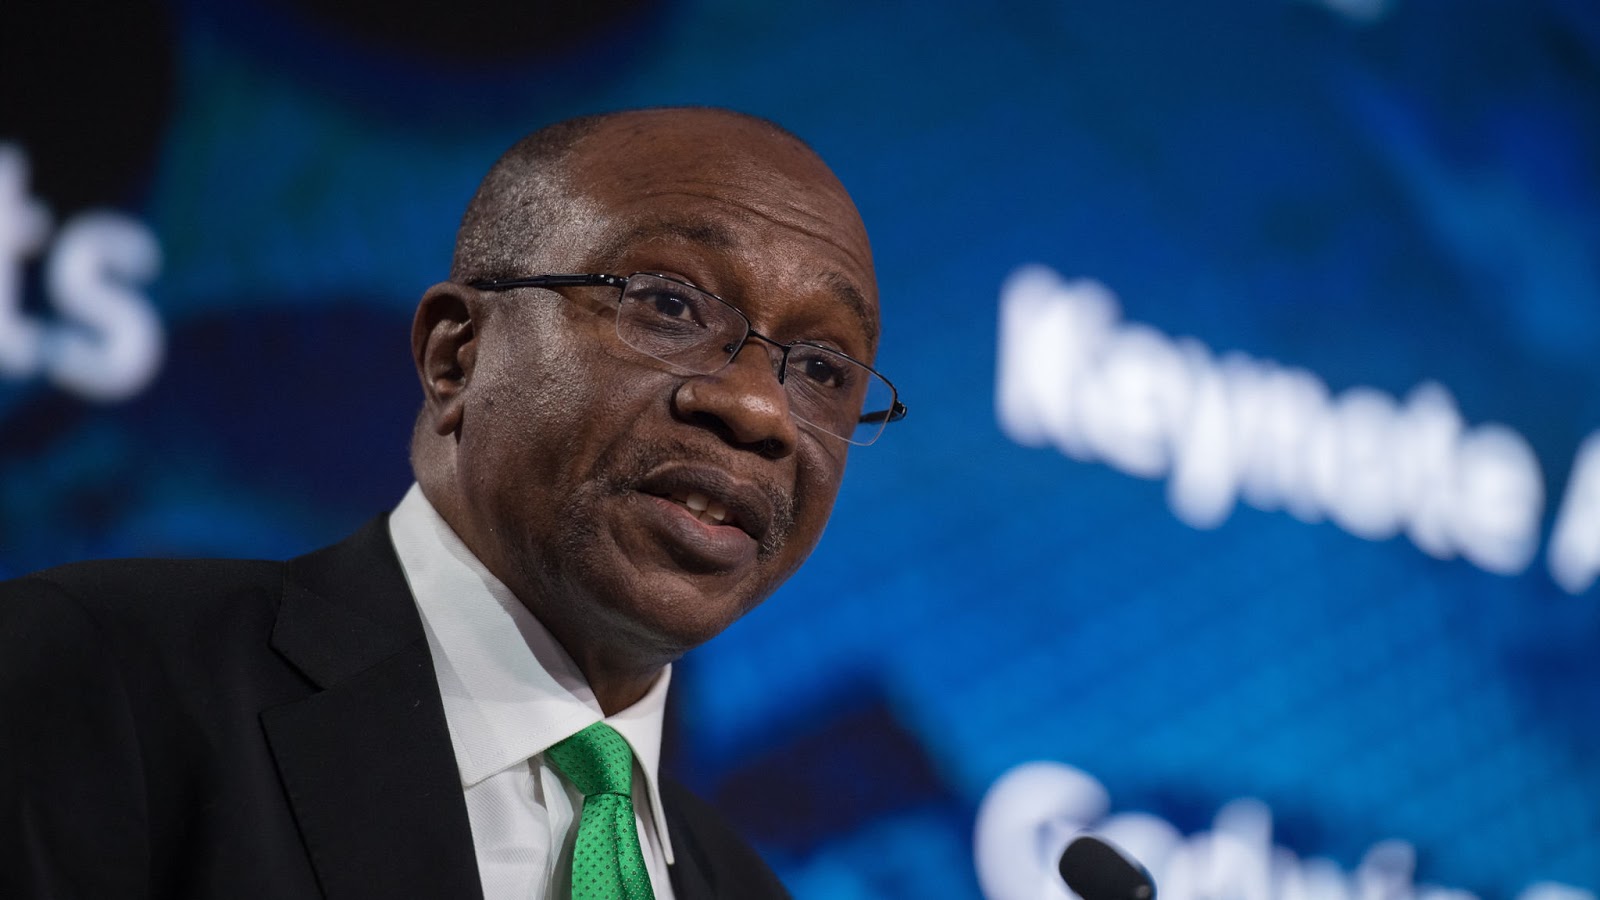 FG recorded N4.62tn fiscal deficit in 2019 — CBN